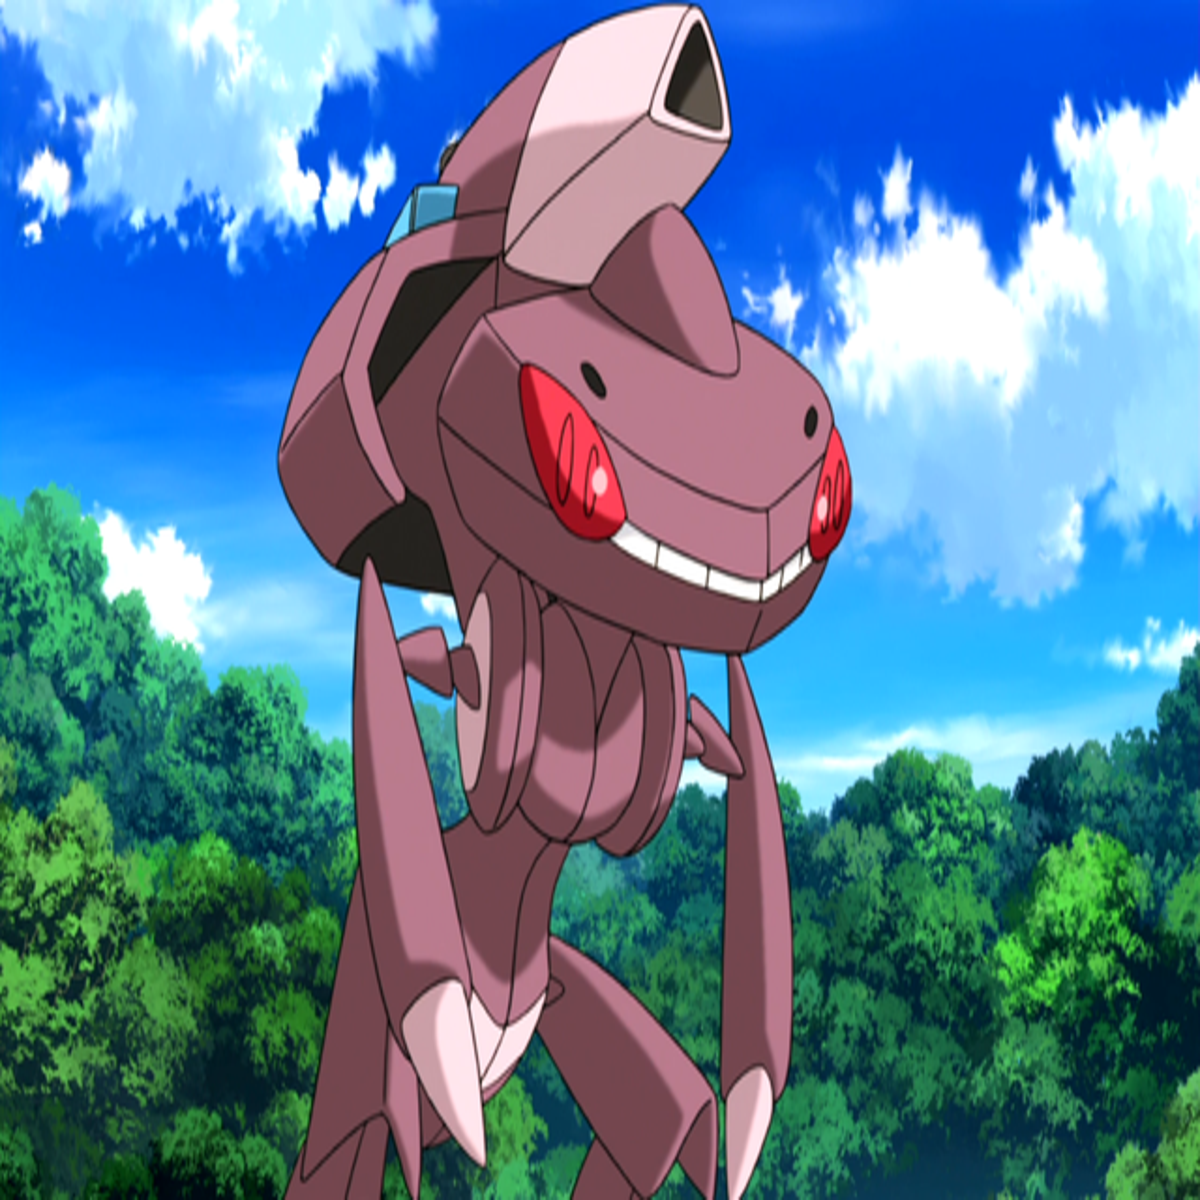 Get the Mythical Pokémon Genesect! 